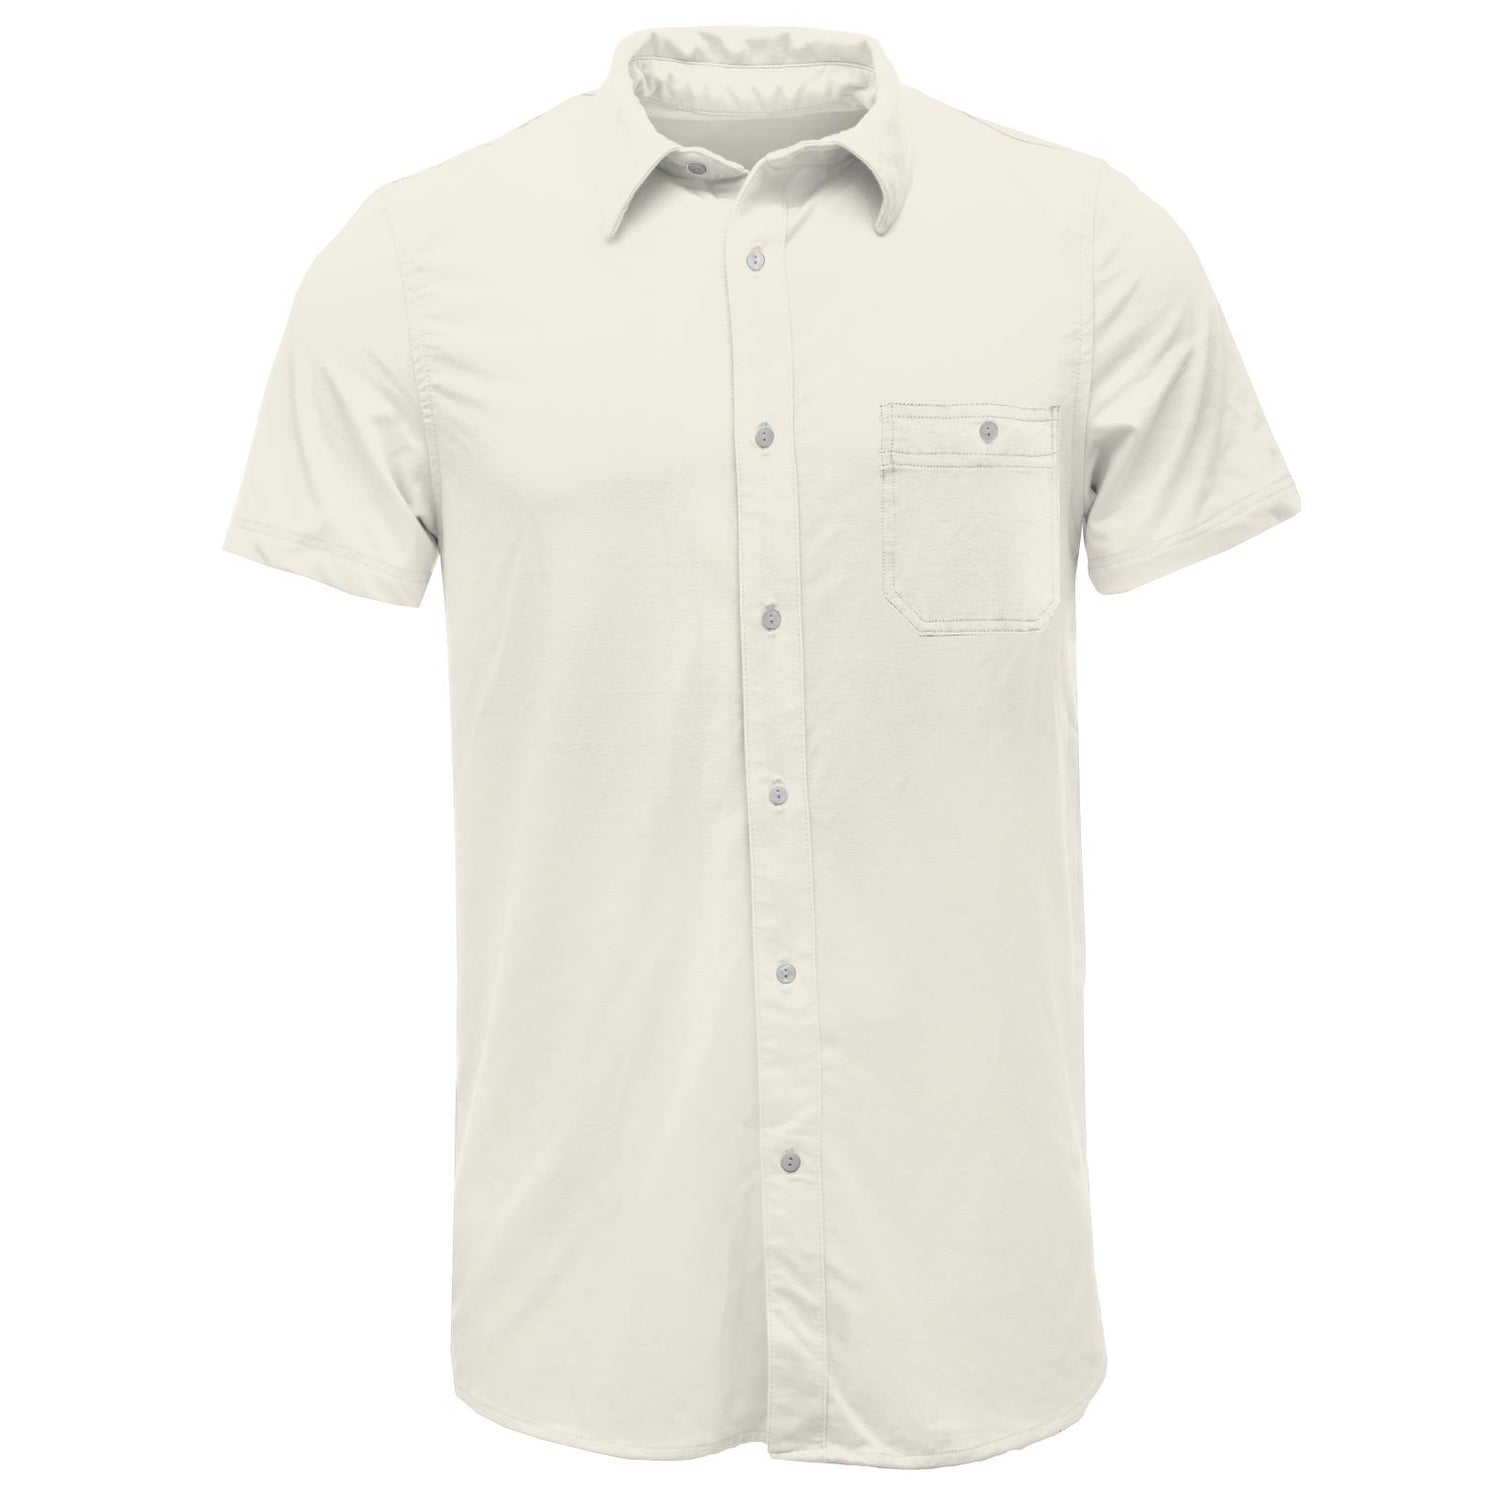 Men's Solid Short Sleeve Woven Shirt in Natural